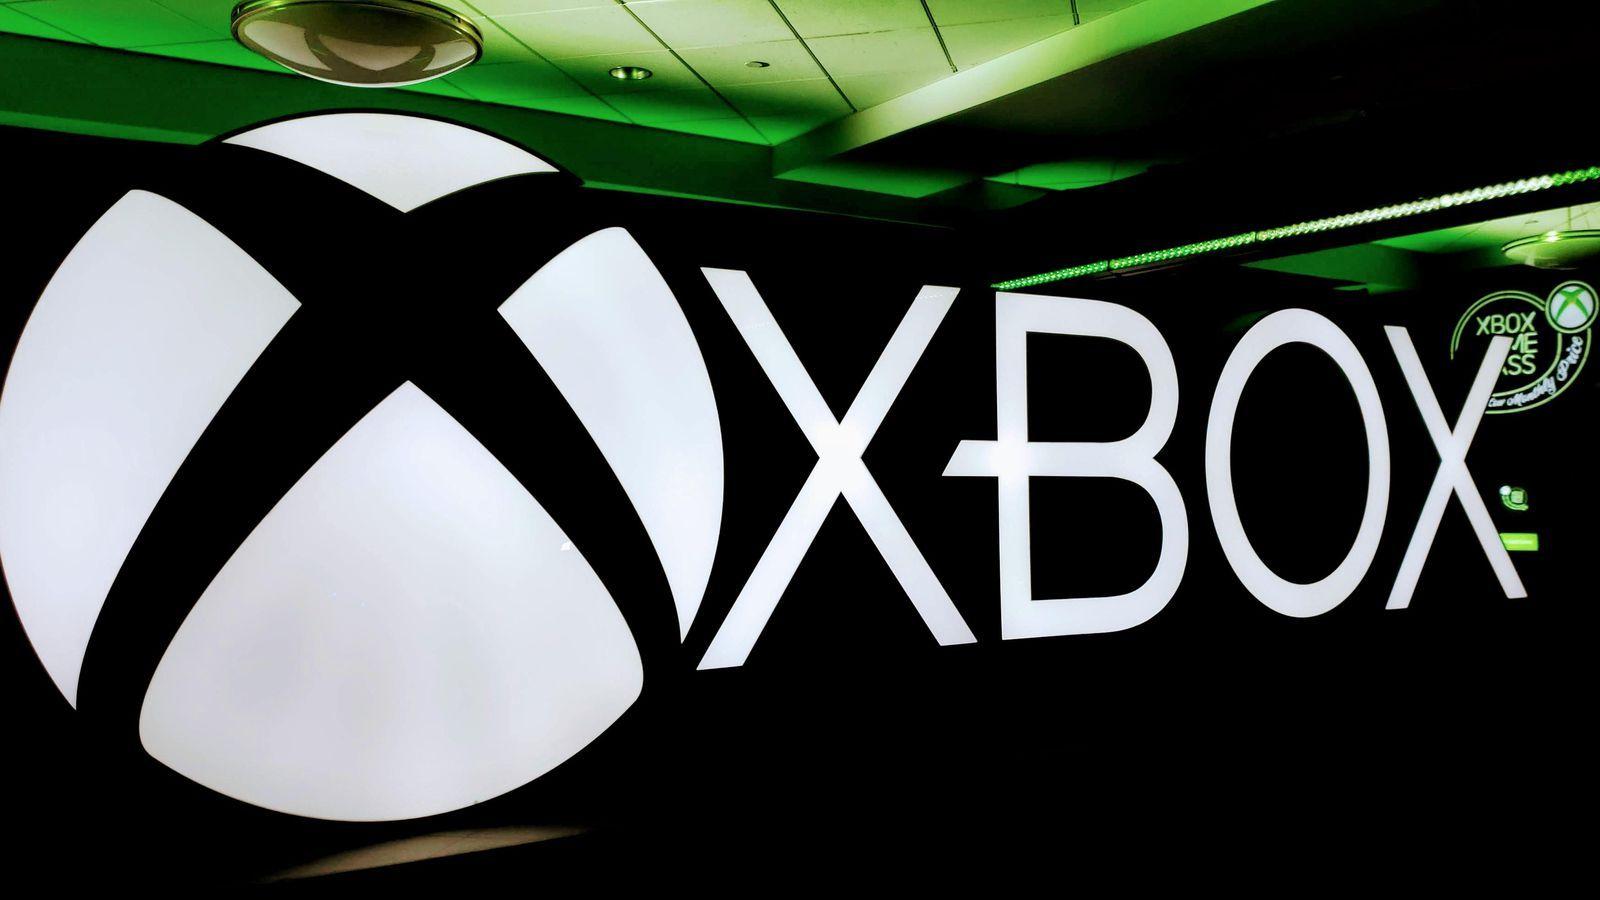 Microsoft Xbox Logo - Here's what happened to Microsoft's Xbox VR gaming headset - CNET